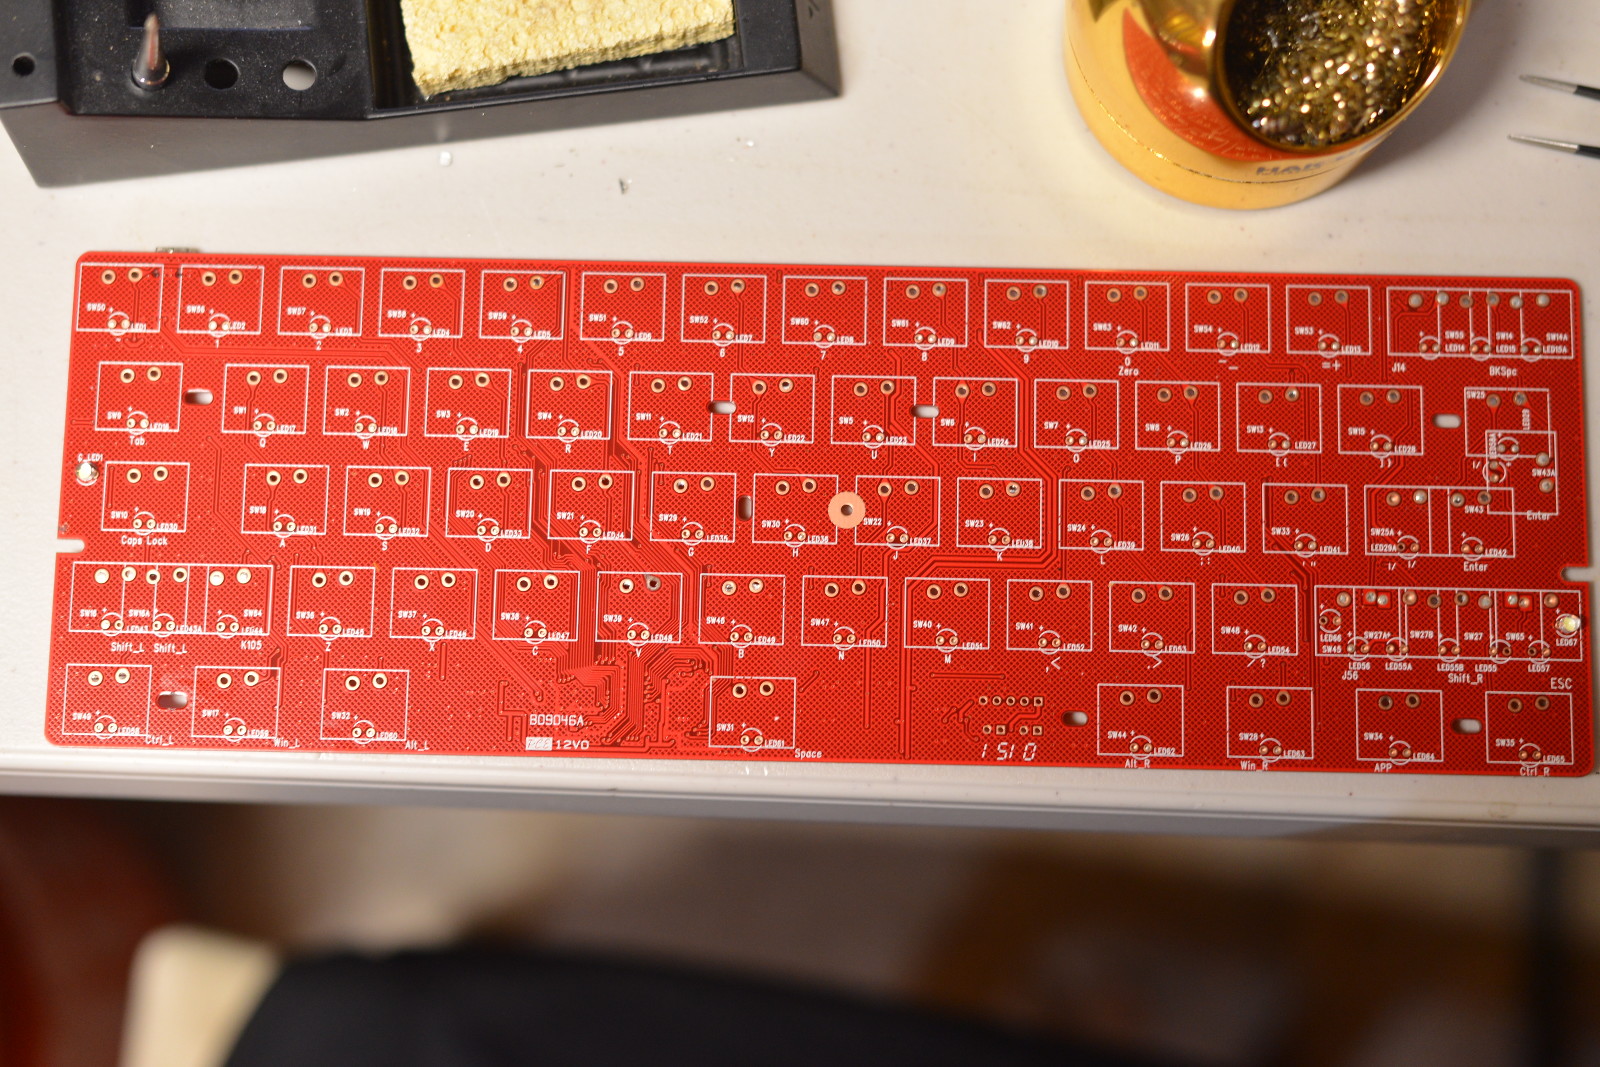 Front side of V60 PCB. Multiple configuration options visible including possible HHKB.